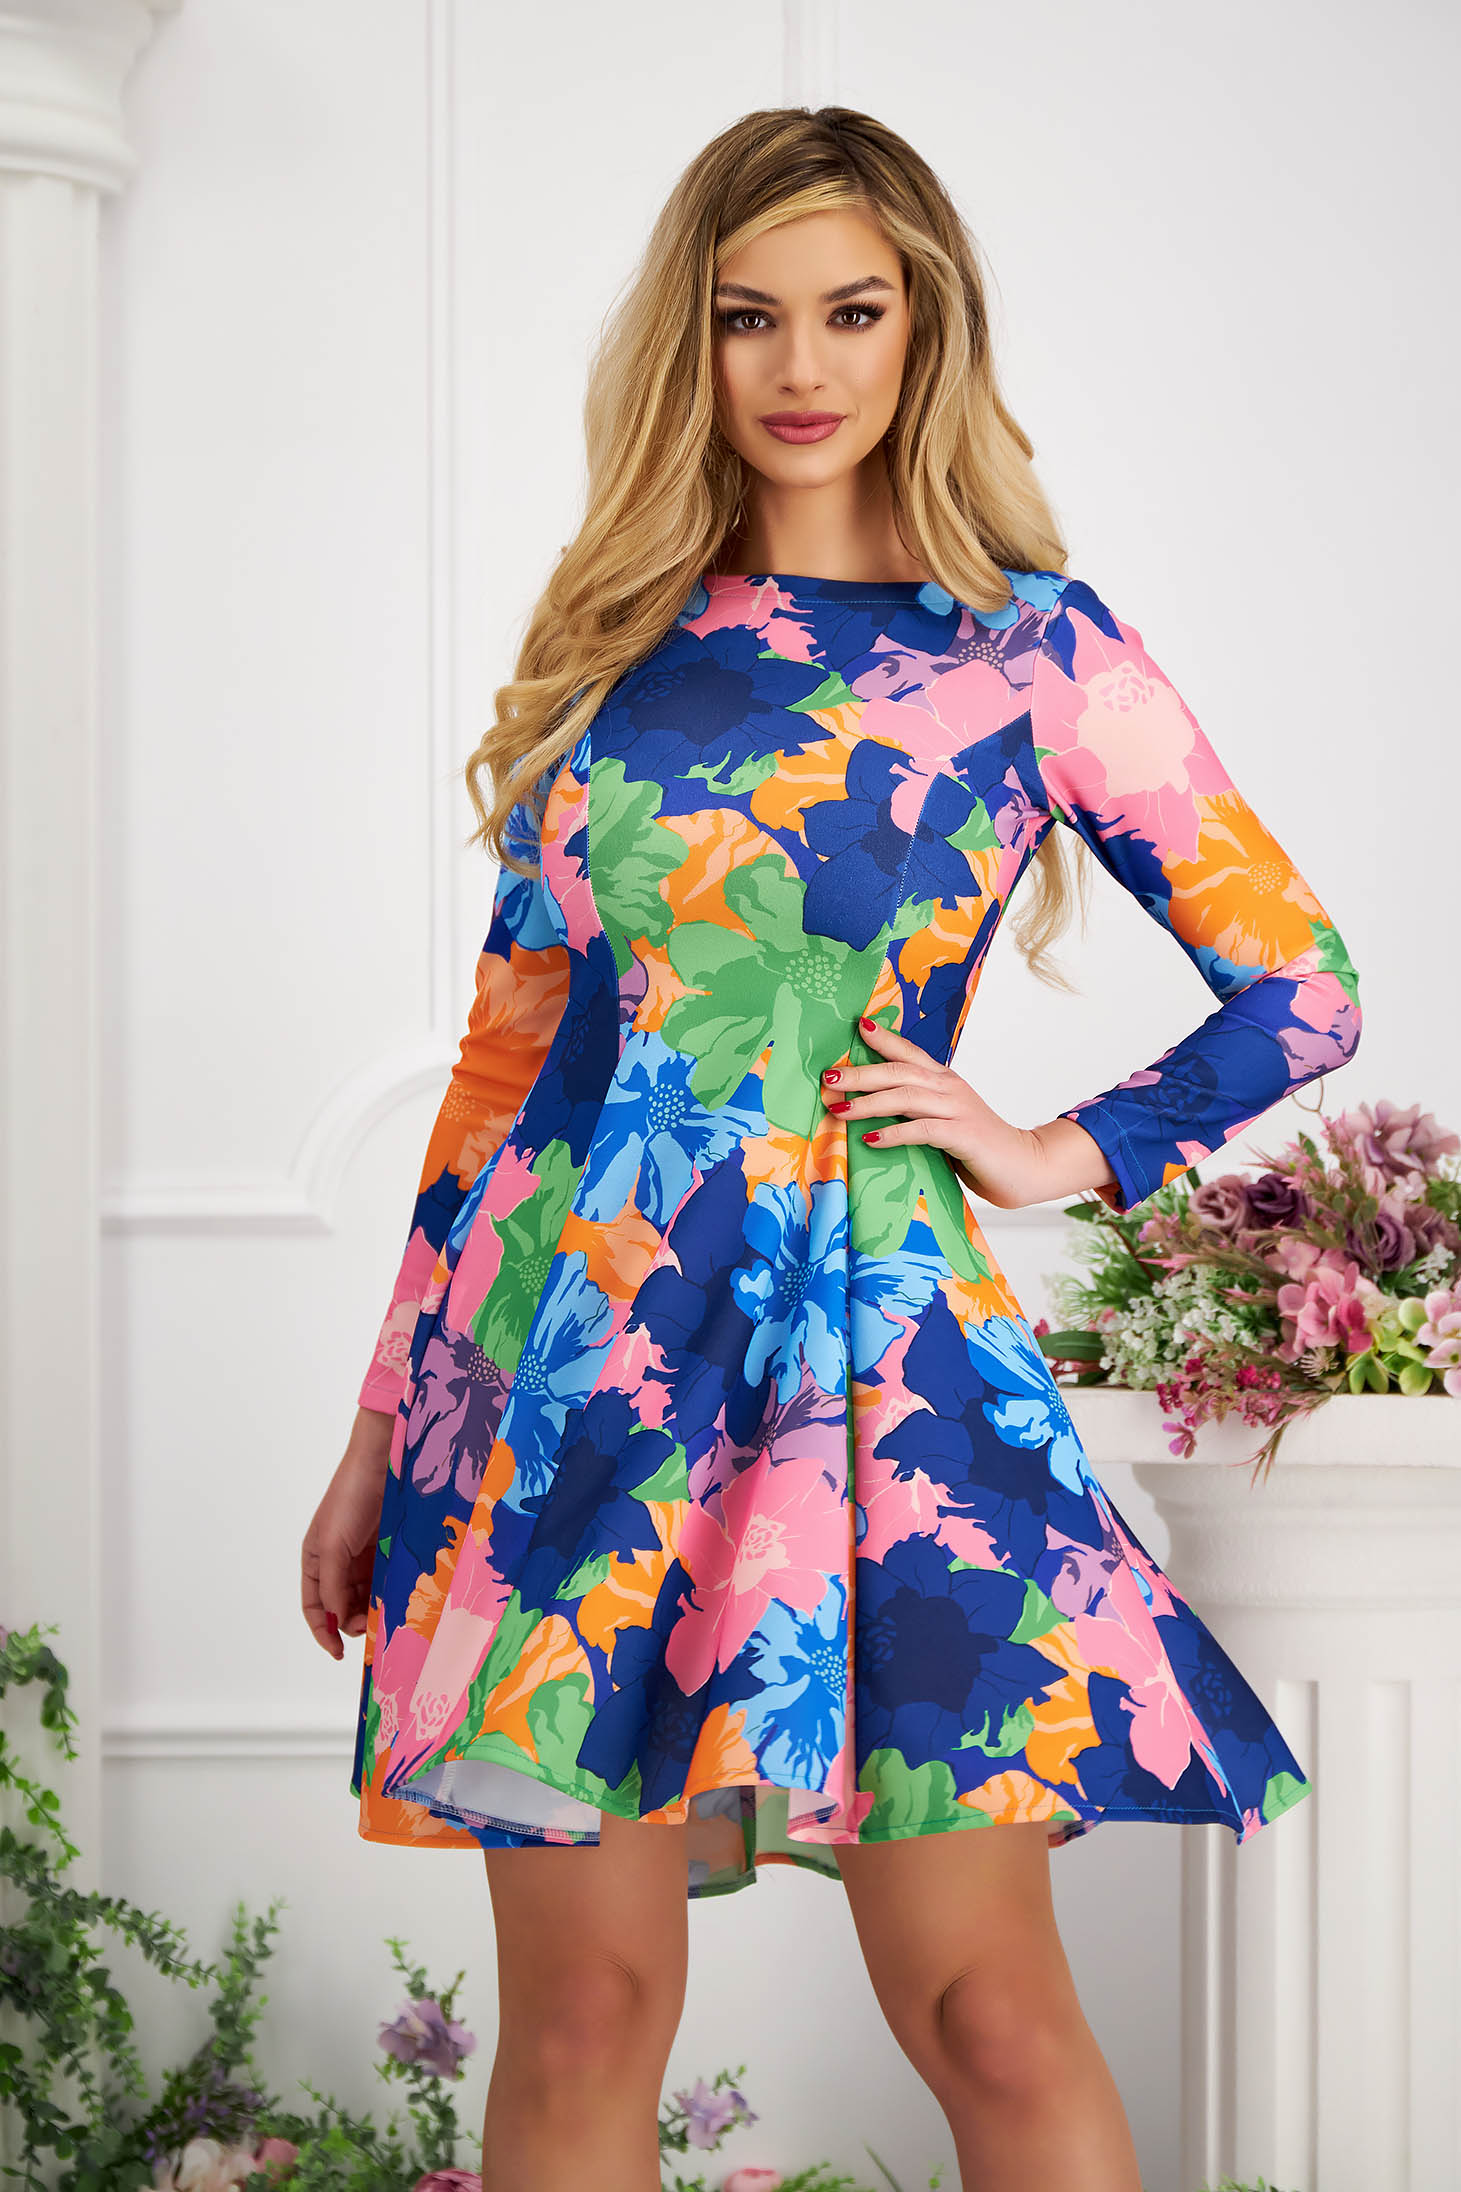 Crep Dress in A-Line with Digital Floral Print - StarShinerS